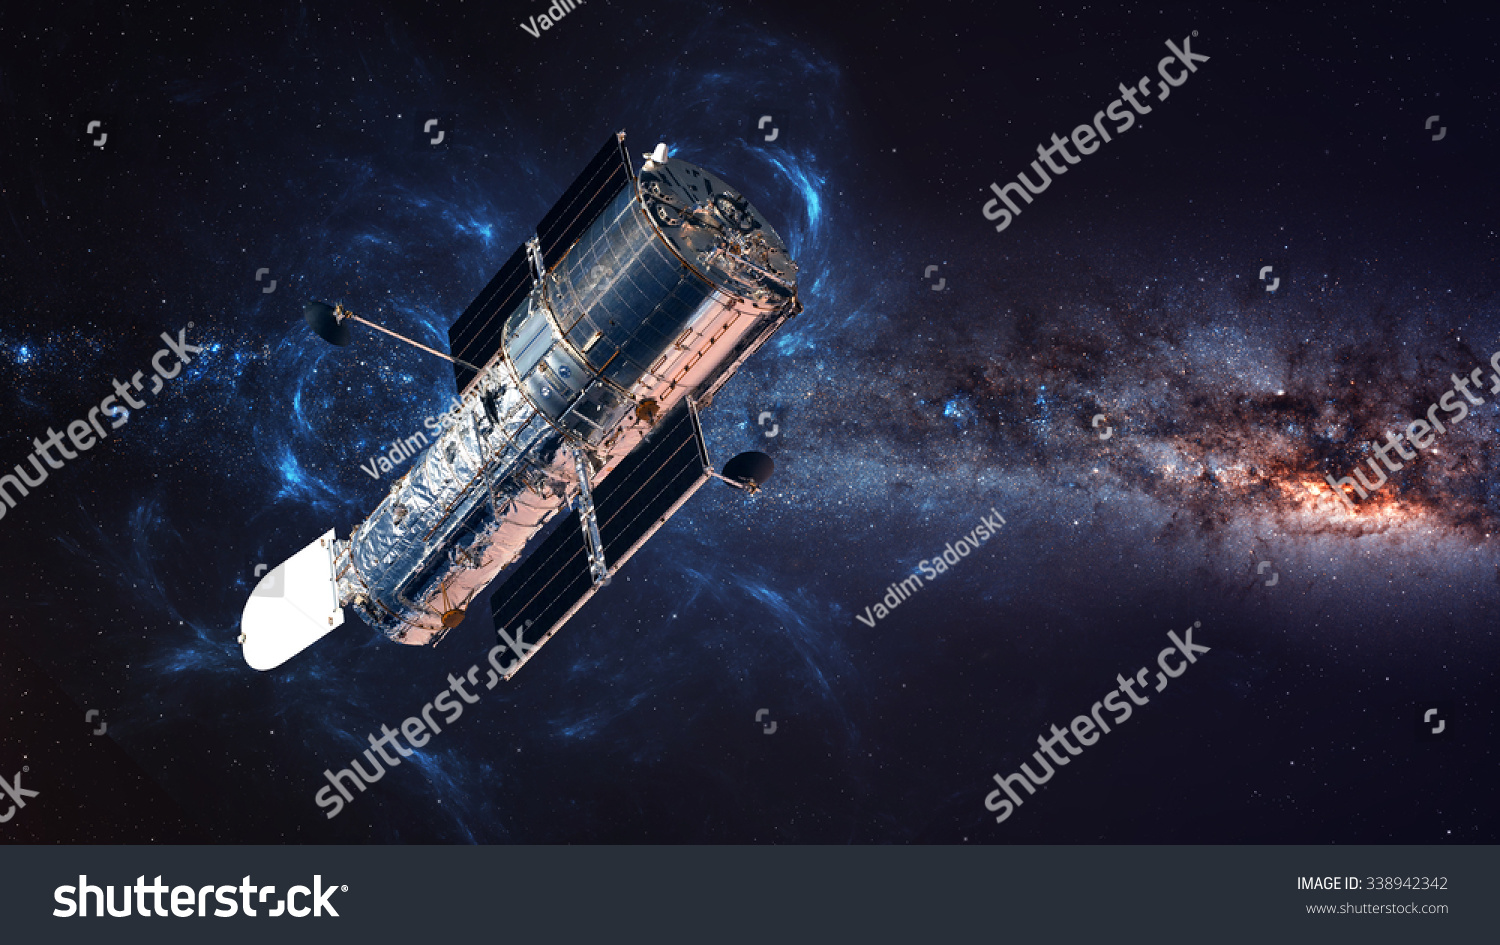 The Hubble Space Telescope in orbit above the Earth. Elements of this image furnished by NASA. #338942342